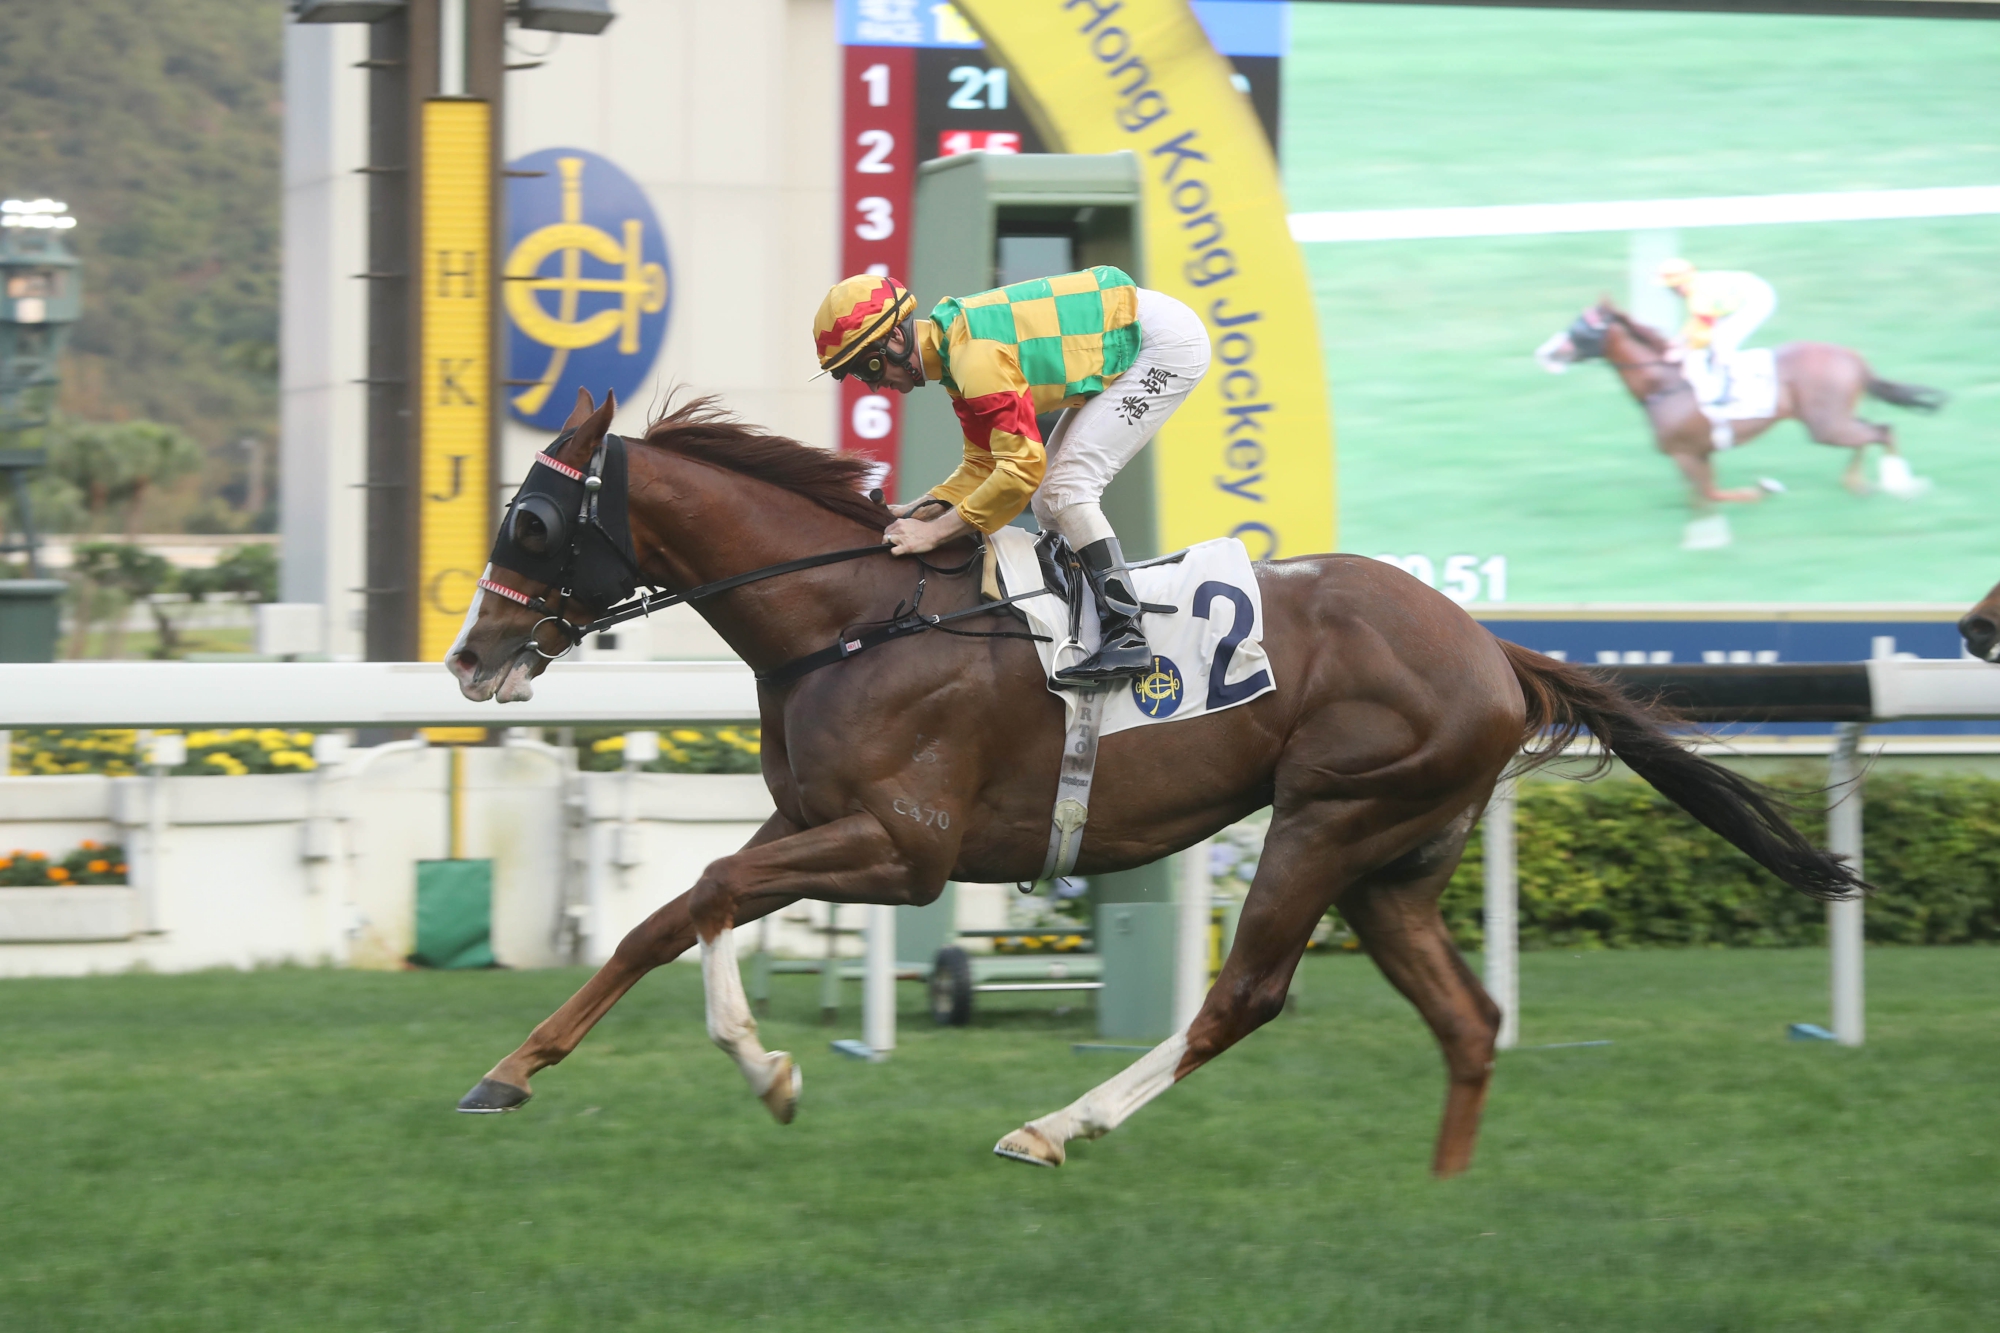 Mighty Giant – HK : Solid galloper with six wins including five in succession before well beaten for fourth in G2 Jockey Club Mile.